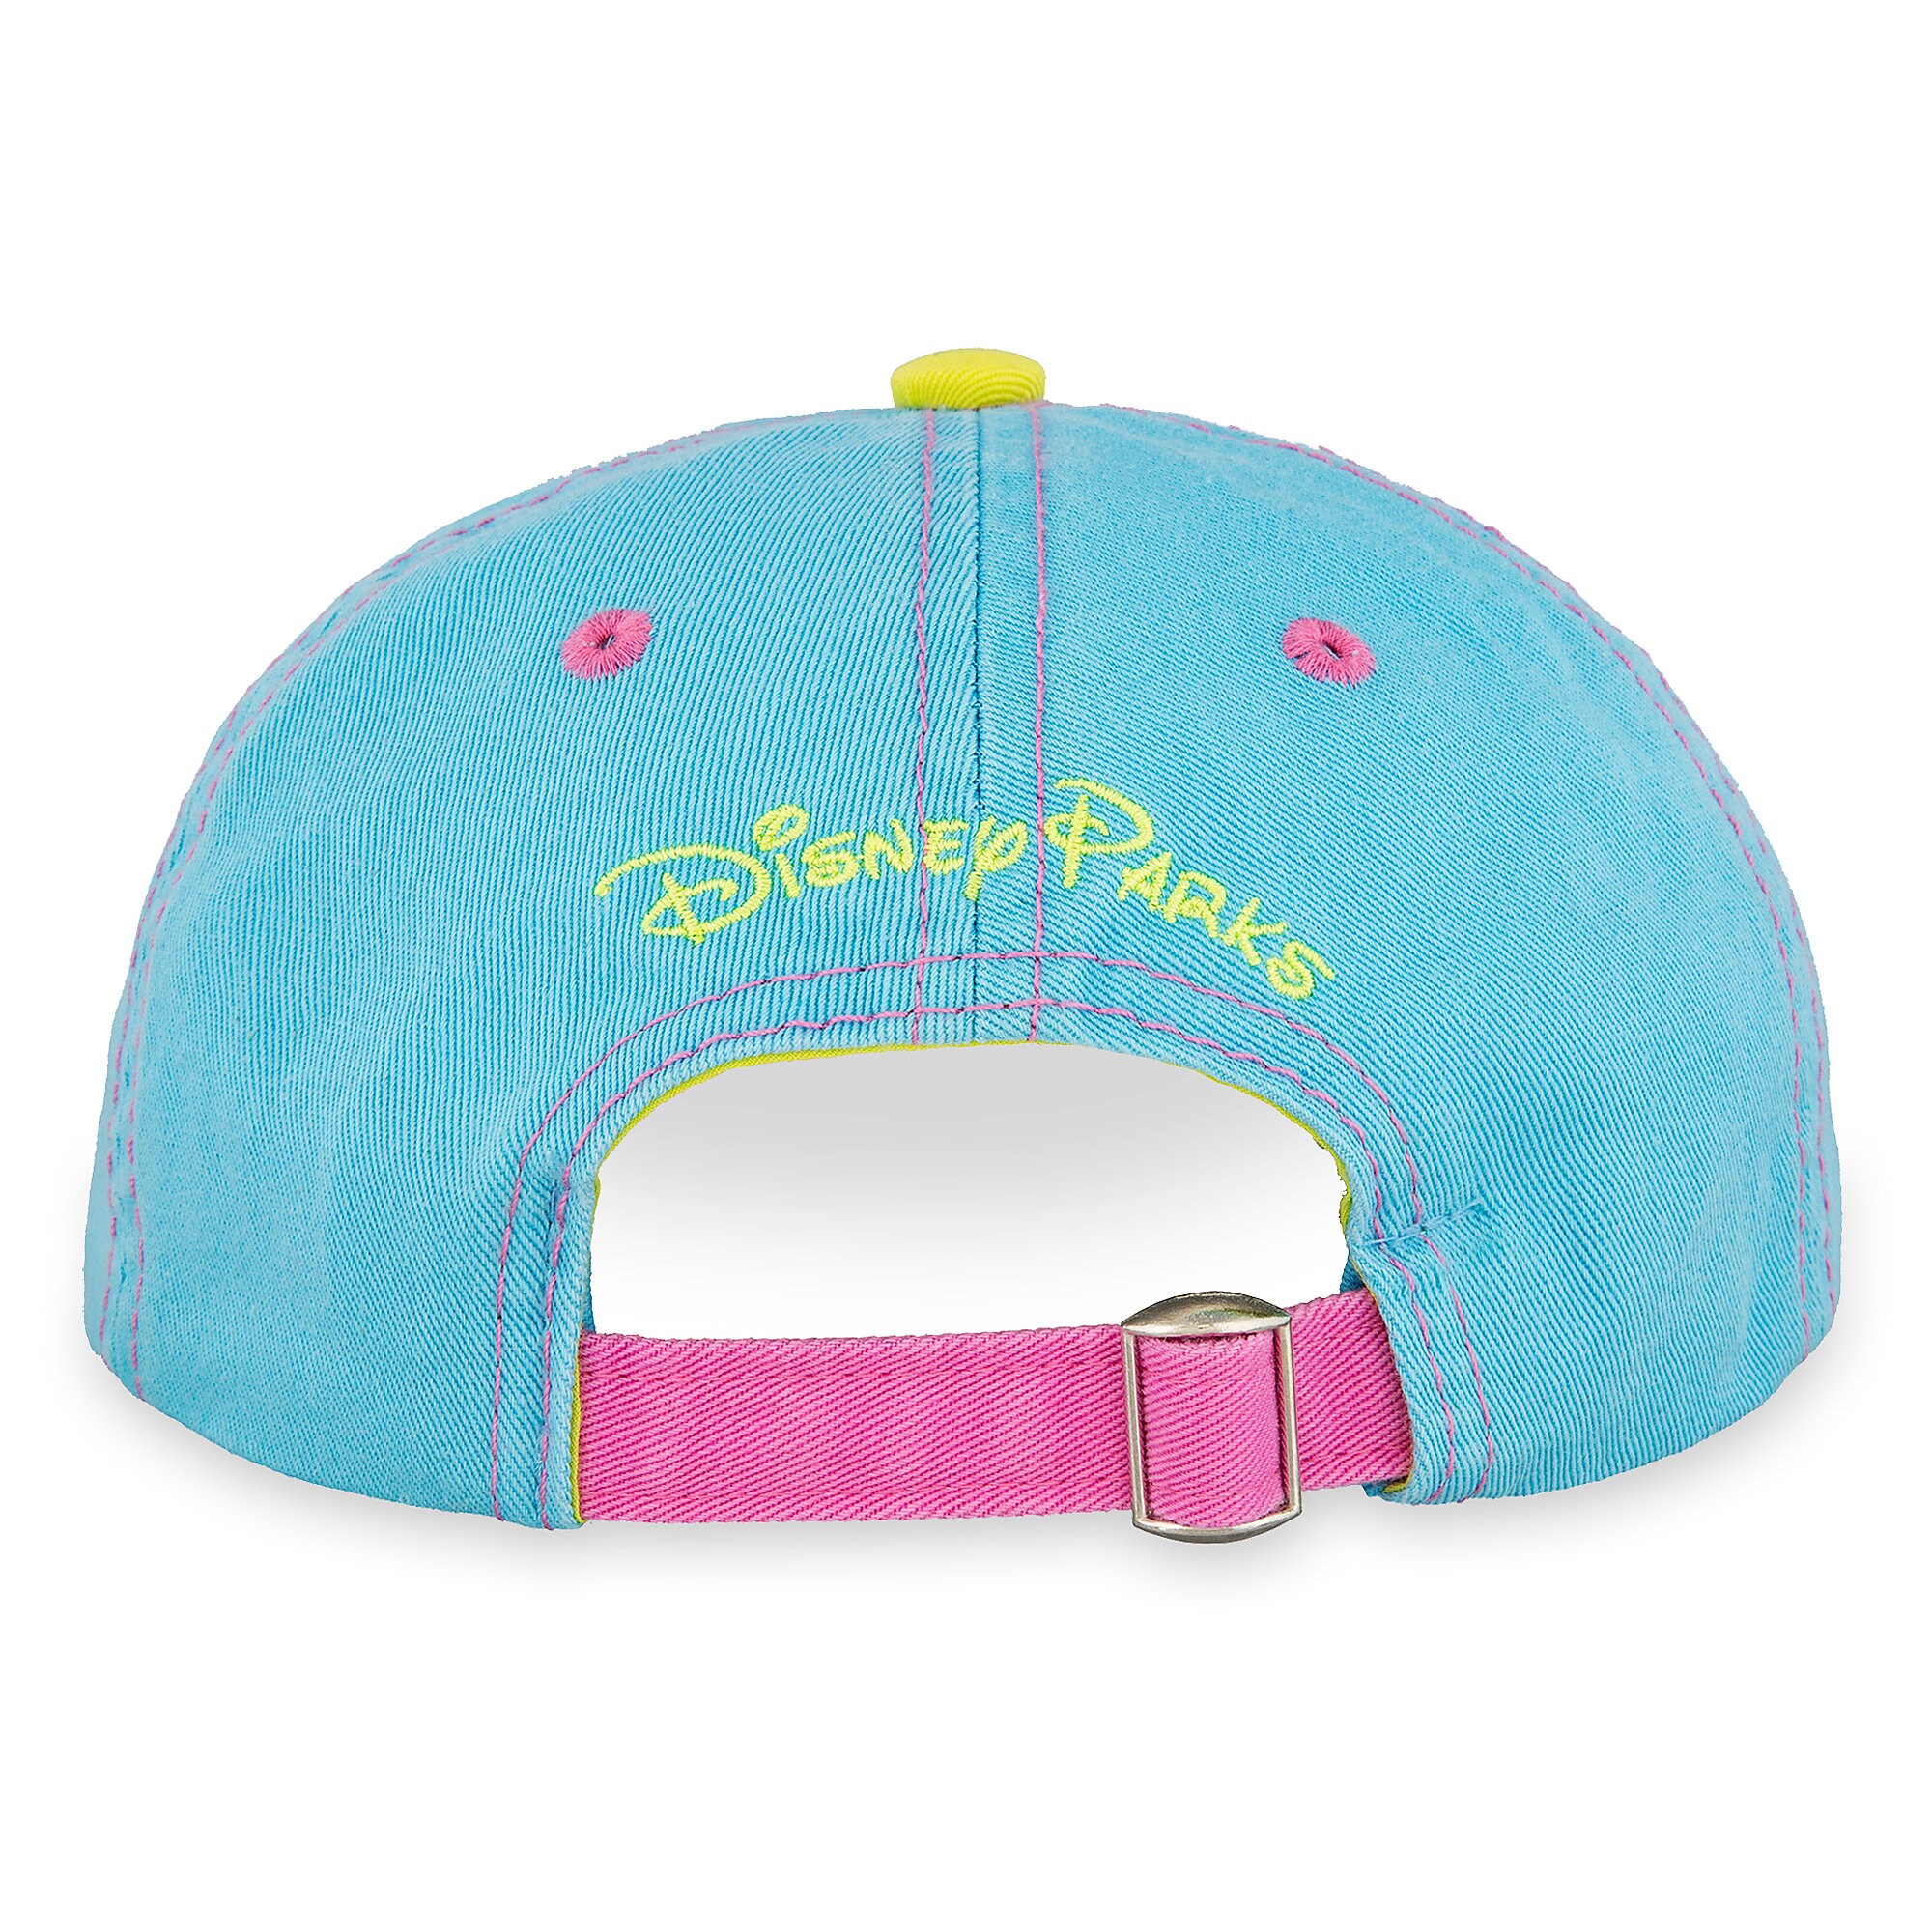 Dumbo ''Frequent Flyer'' Baseball Cap for Adults